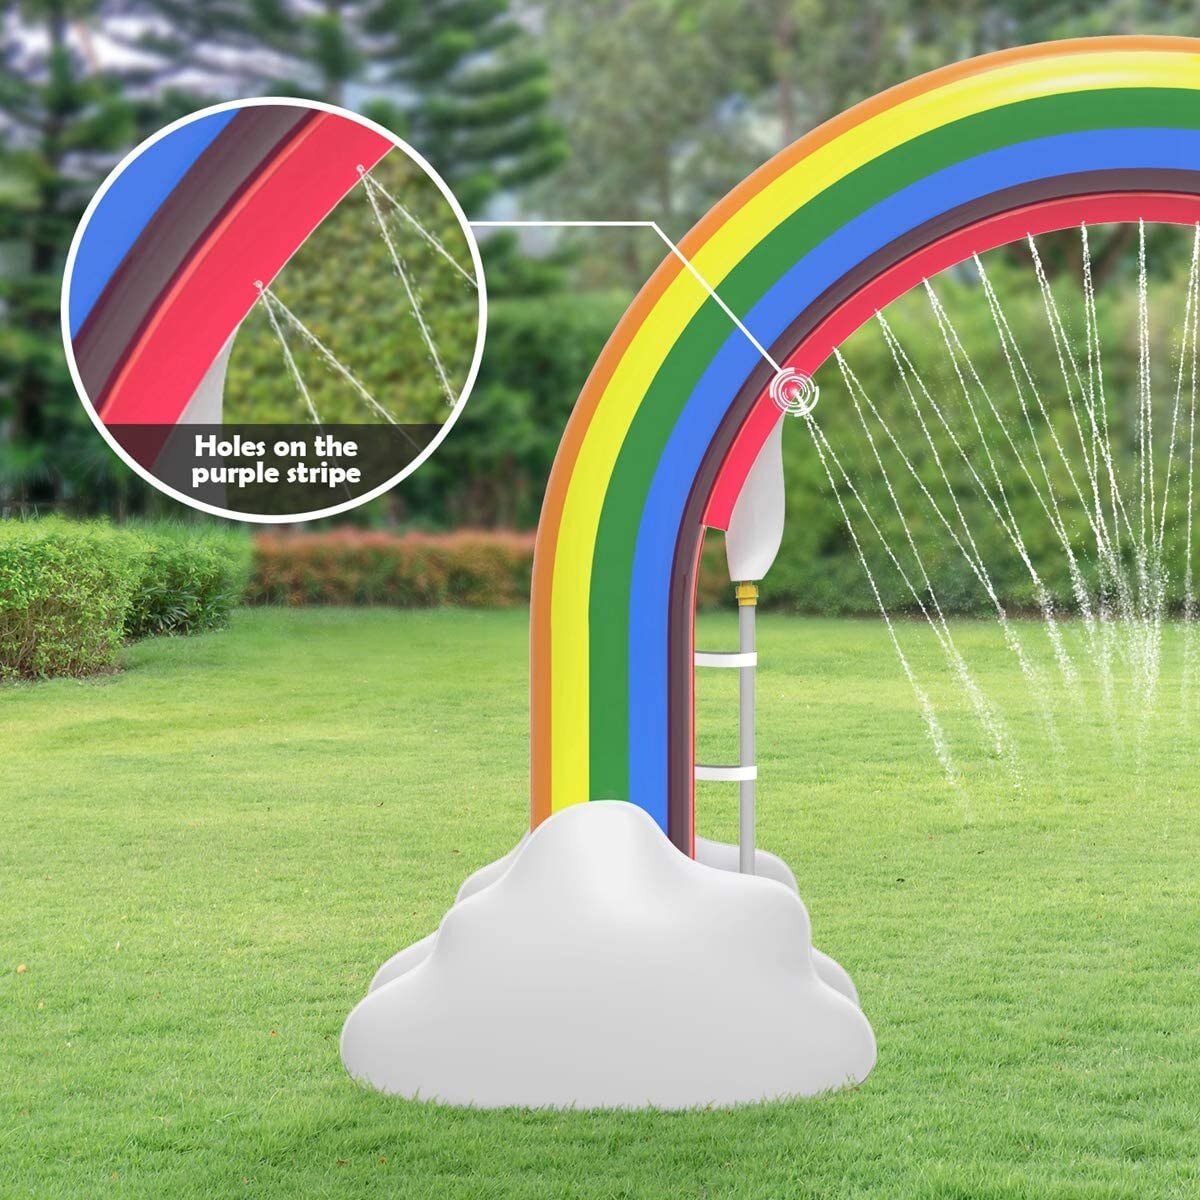  Water Play at Home on Hello Rascal Kids. Rainbow water sprinkler.  